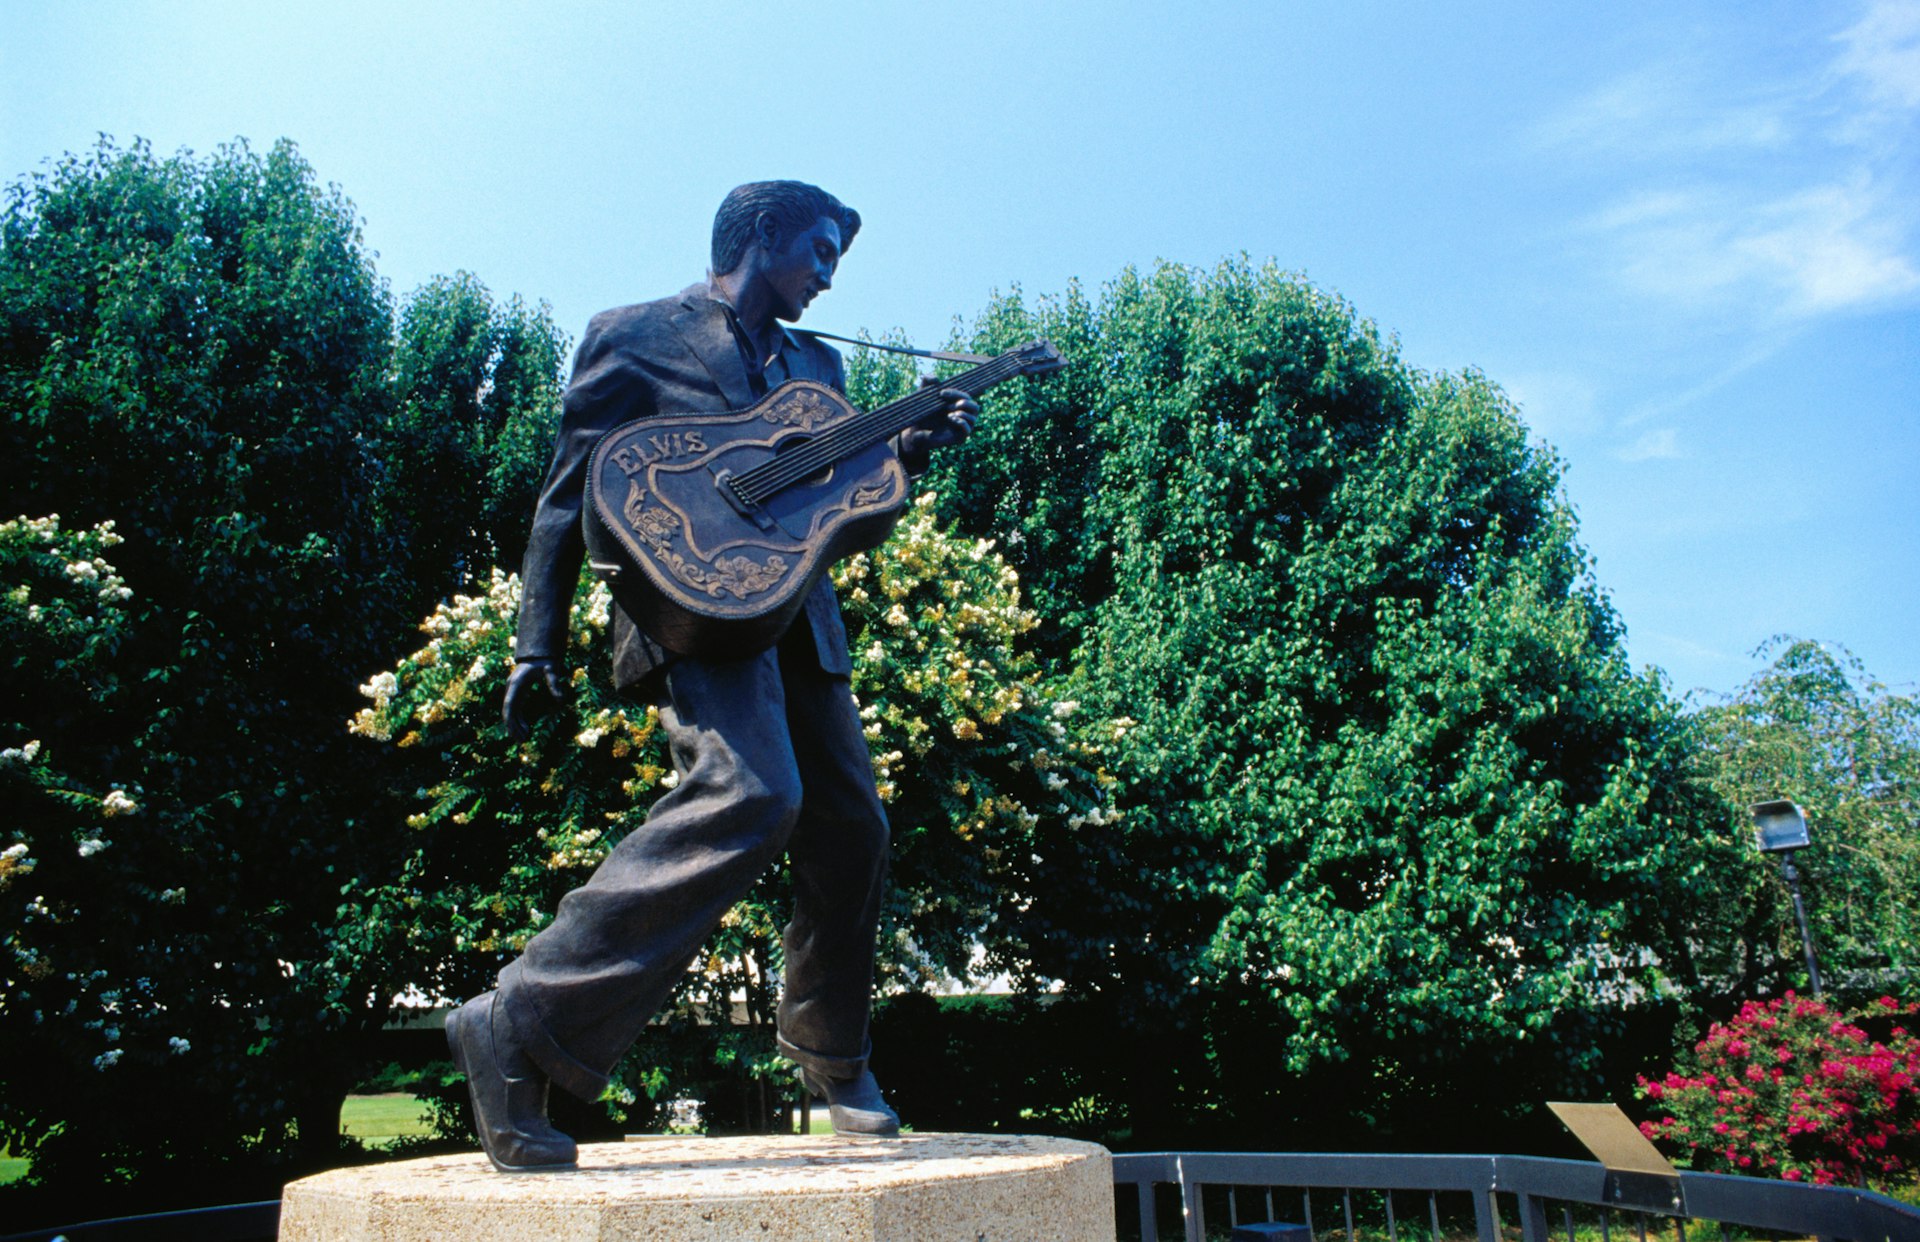 Statue of a man holding a guitar in parkland